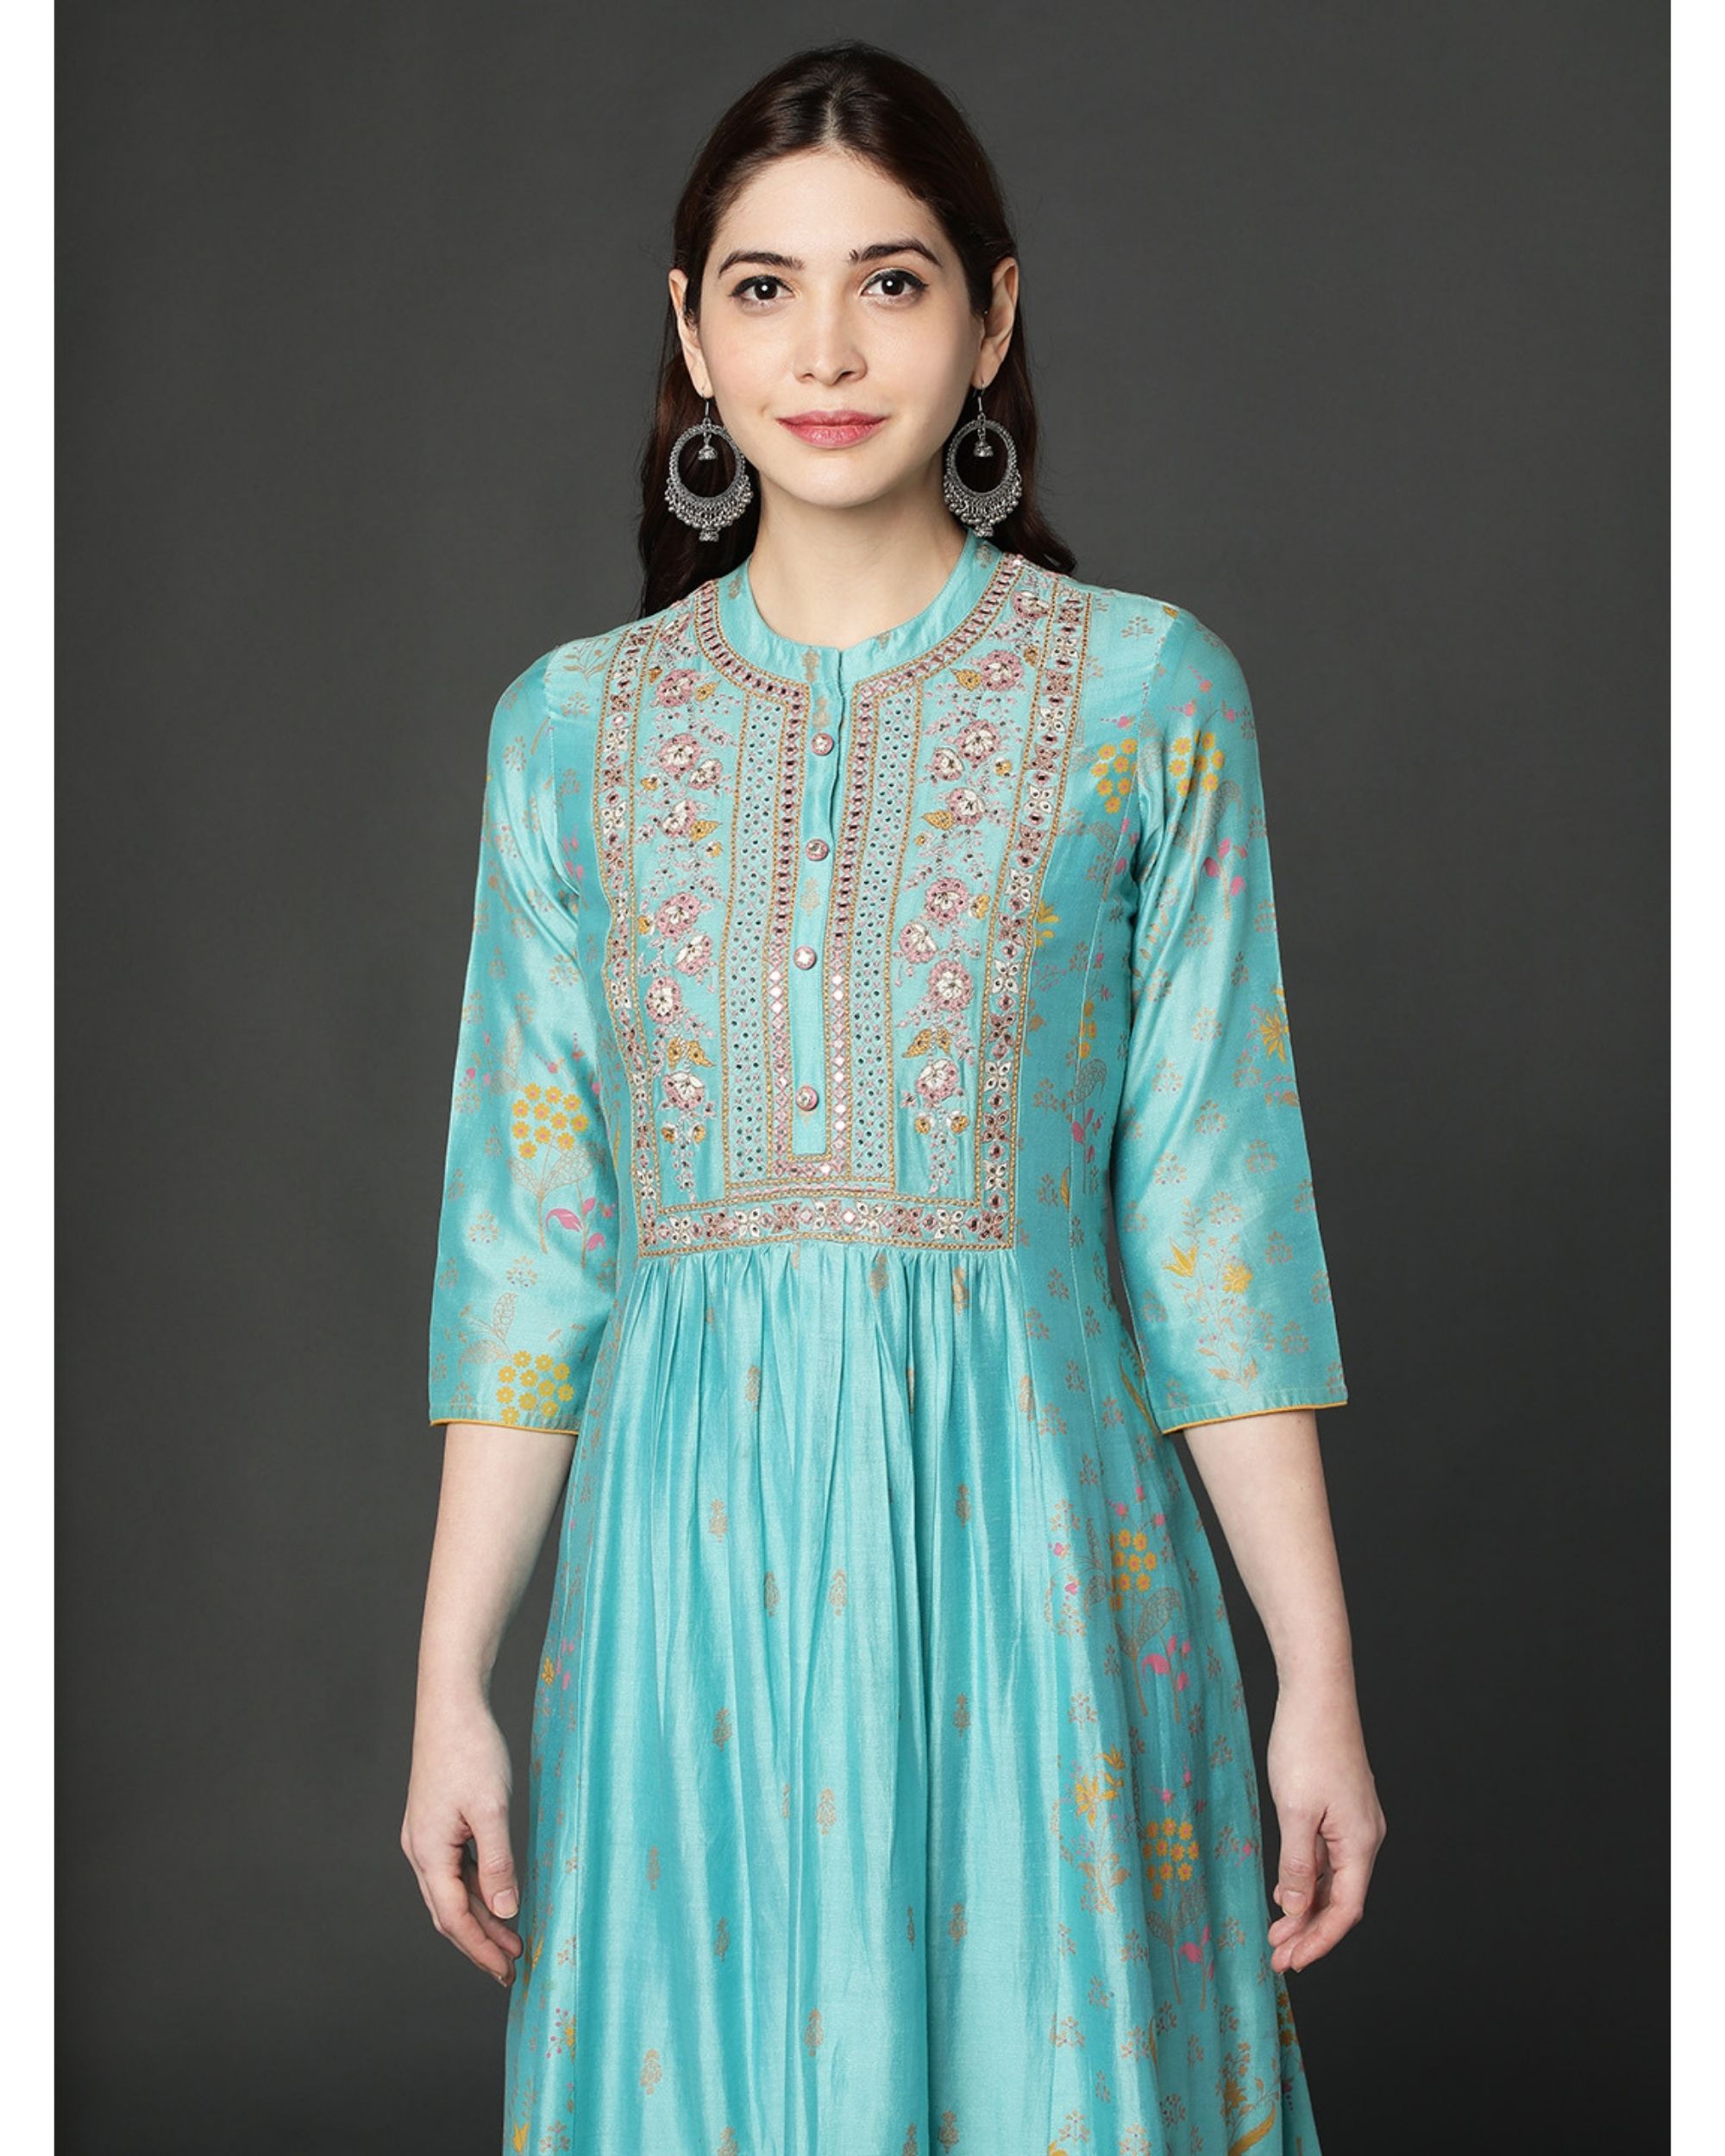 Turquoise embroidered dress by Ojas Designs | The Secret Label